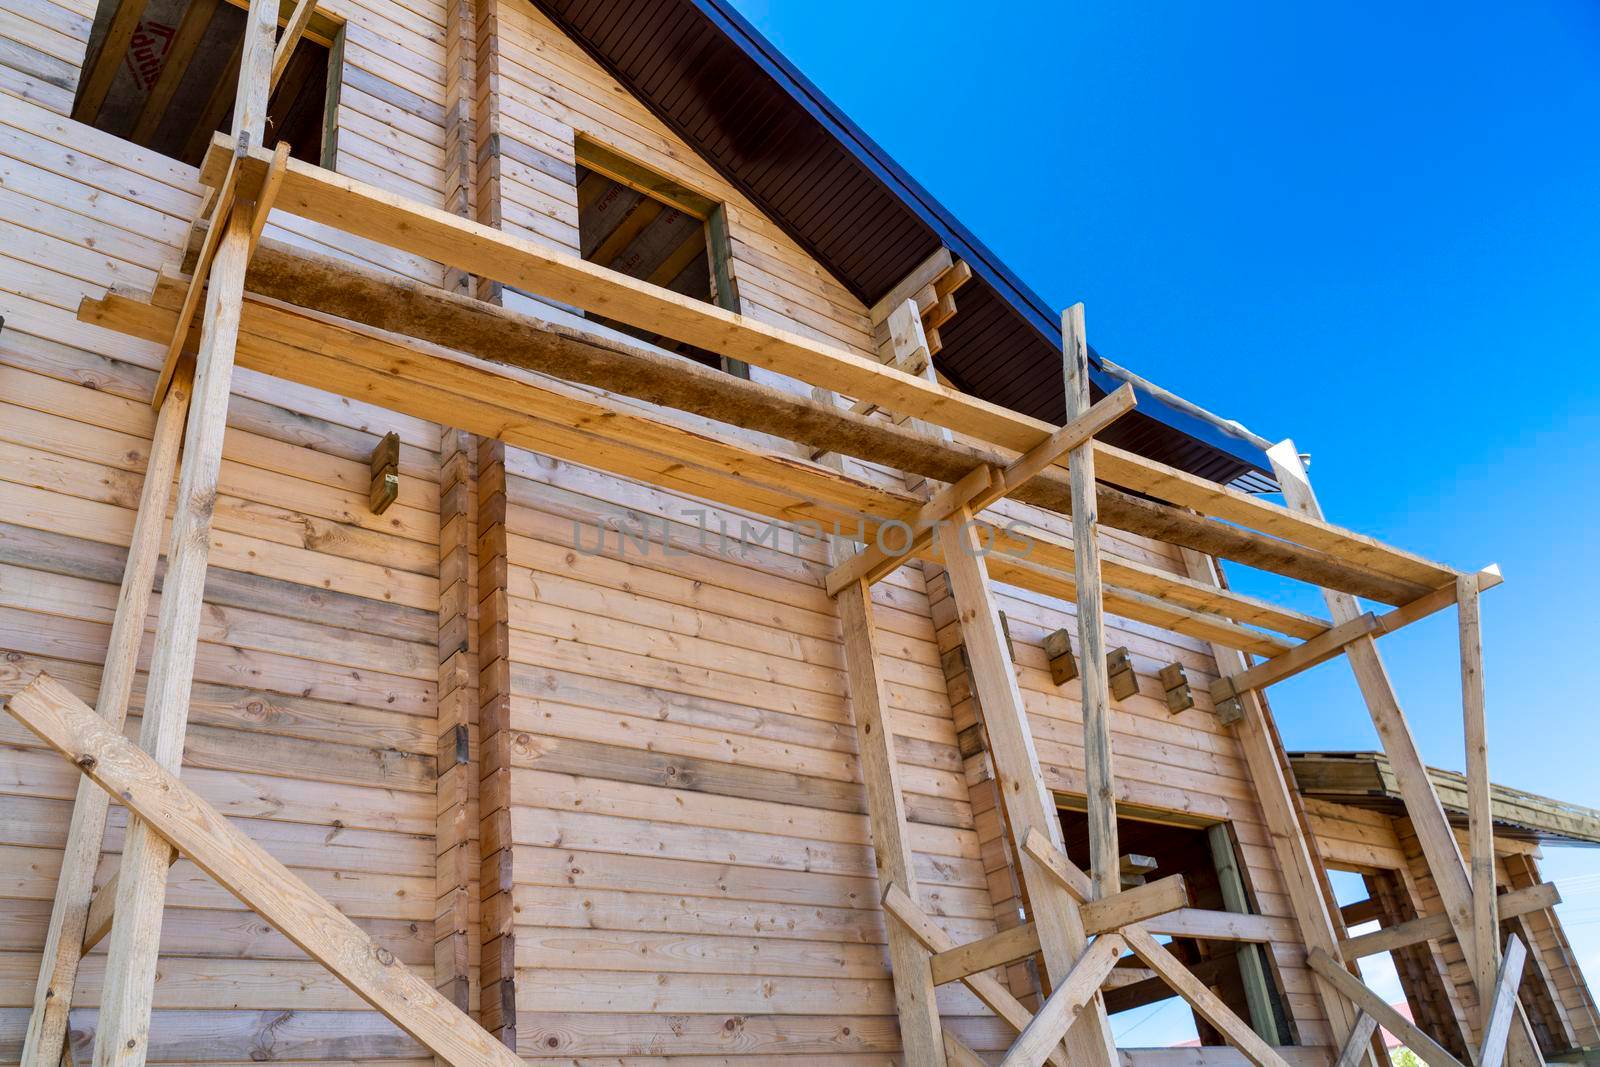 The house with a wooden structure is being built surrounded by scaffolding, blue sky. by Matiunina